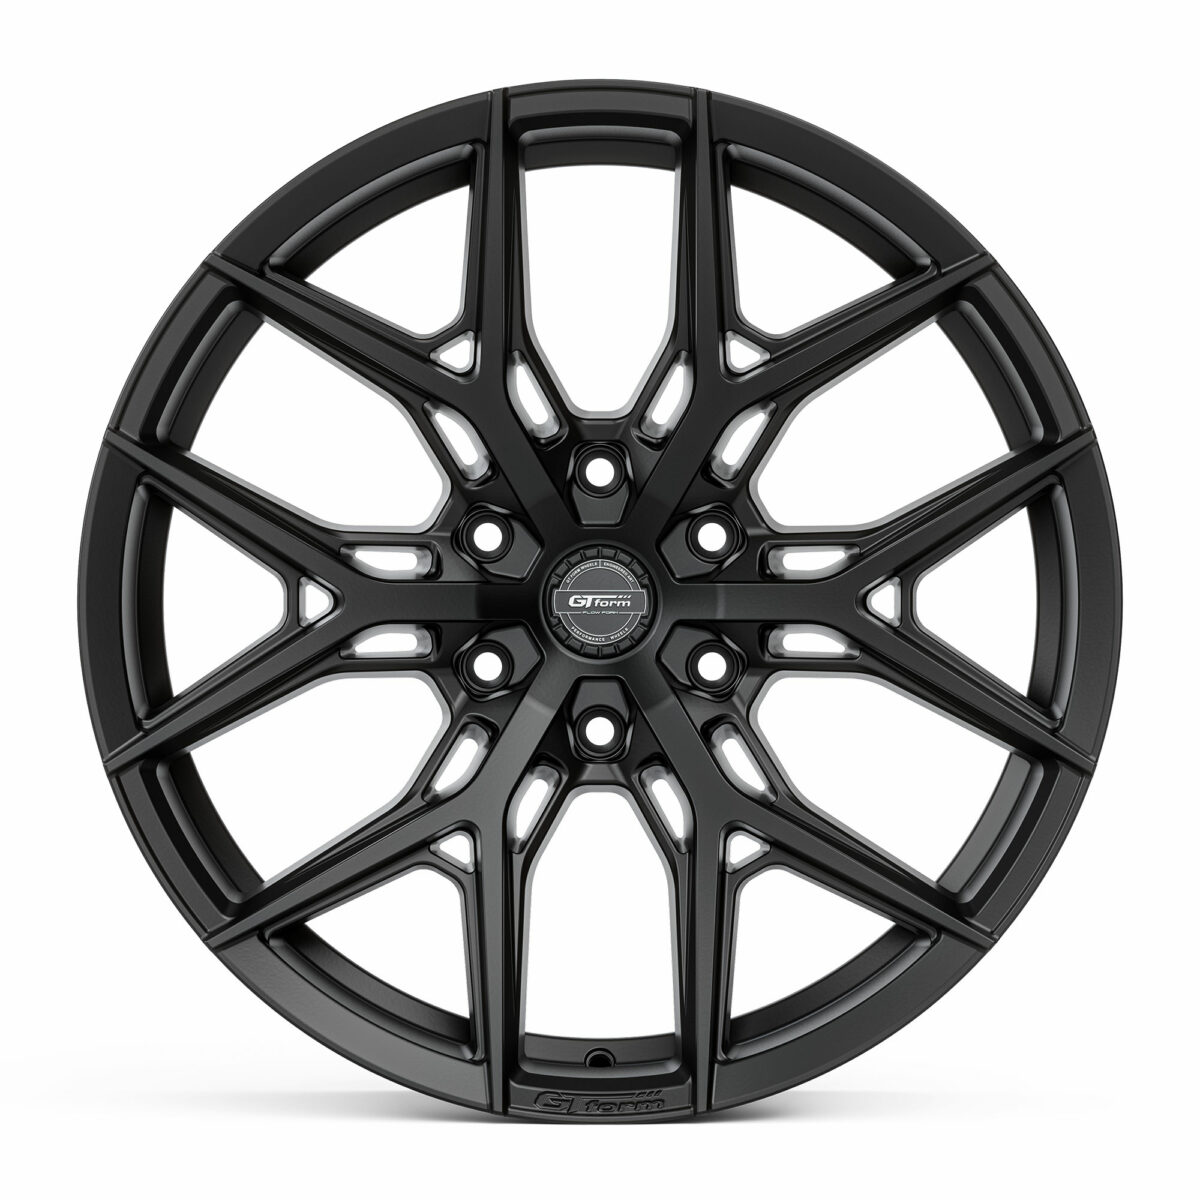 4X4 WHEELS GT FORM GFS1 SATIN BLACK 18 20 22 INCH OFFROAD RIMS FOR 4WD SUV